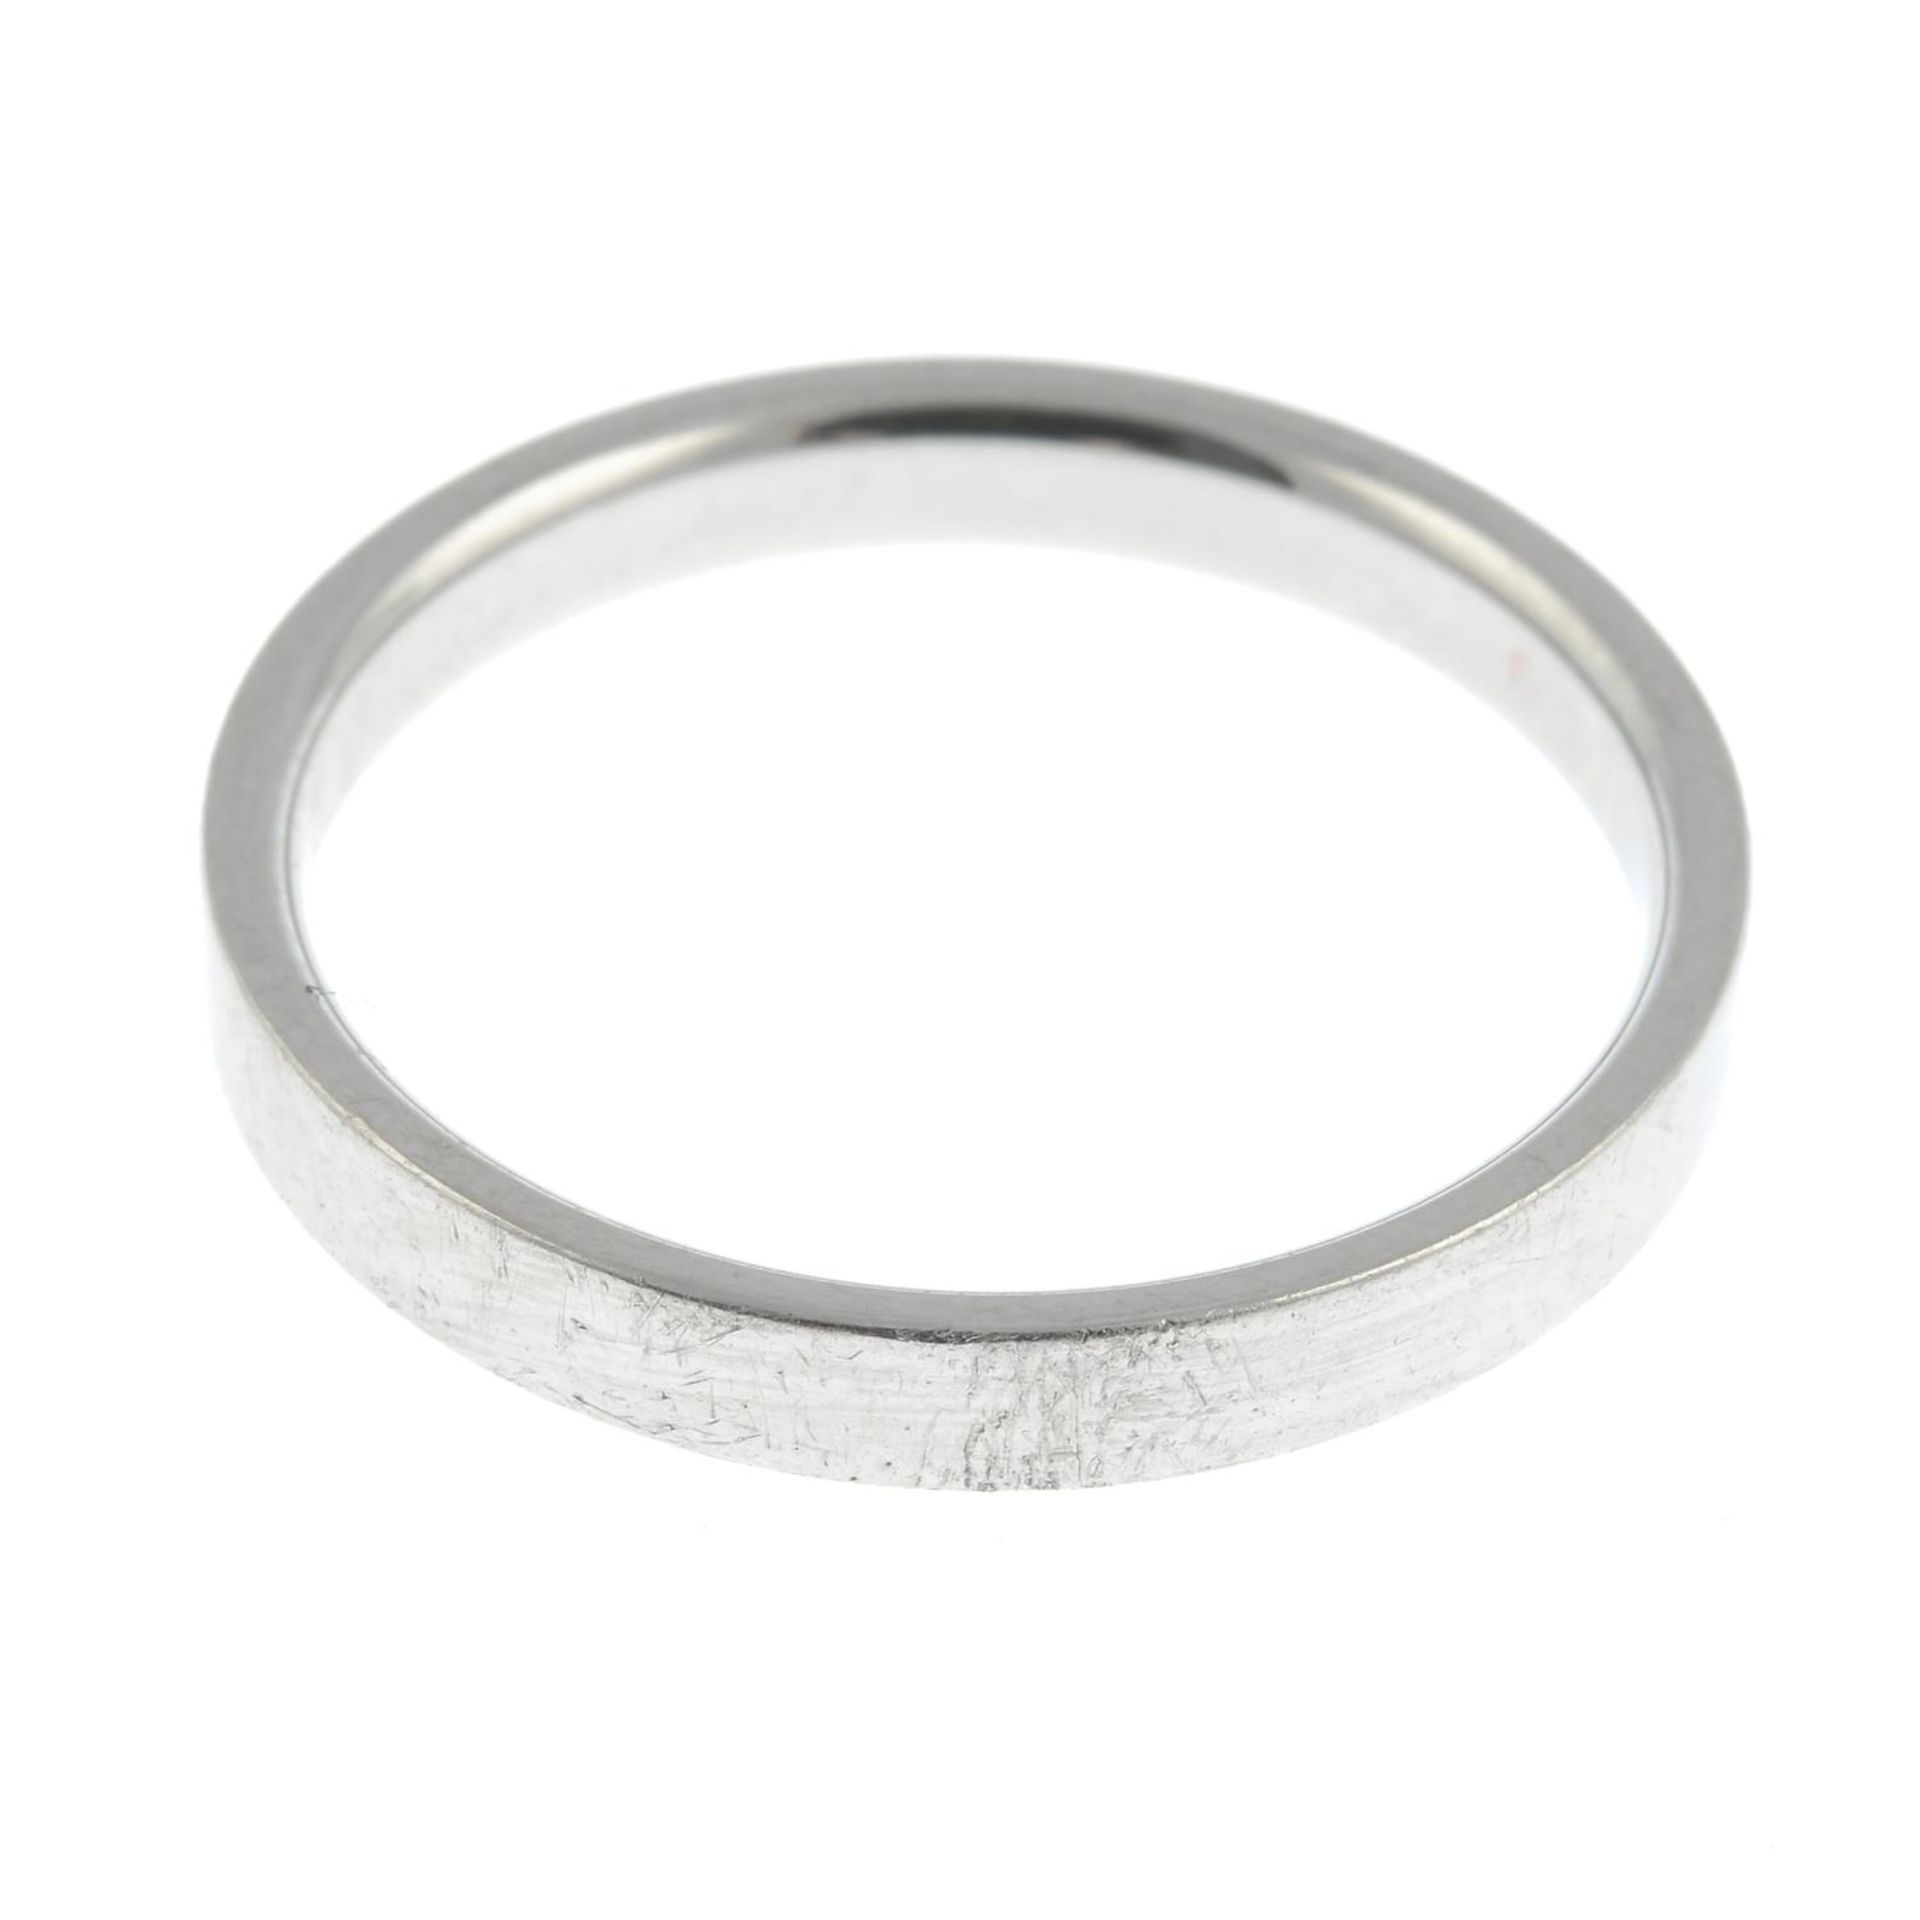 TIFFANY & CO. - a platinum band ring. - Image 3 of 3